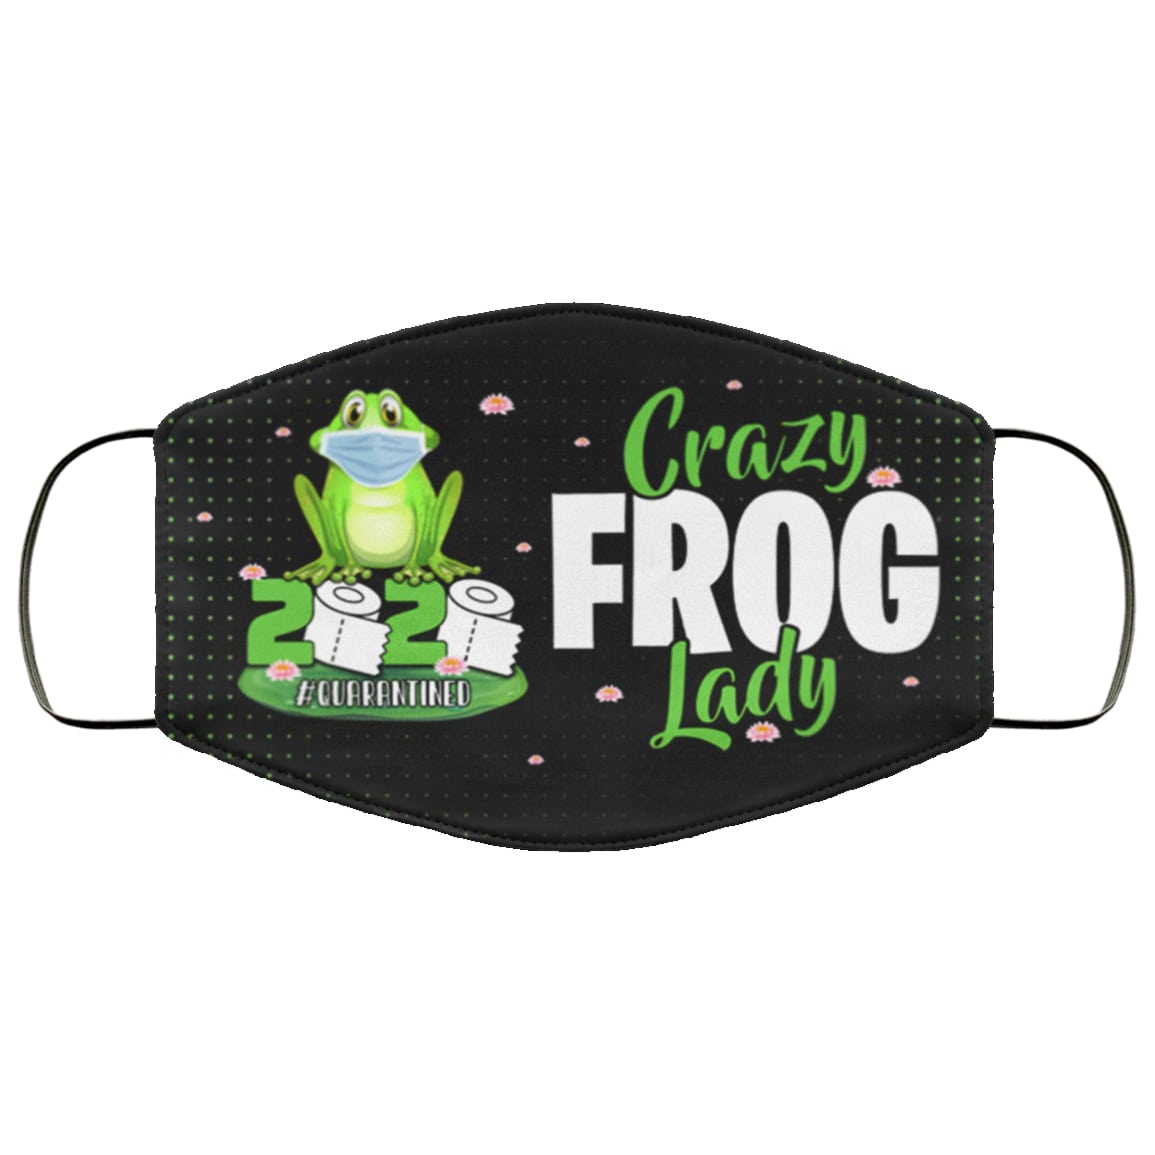 Crazy frog lady 2020 quarantined anti pollution face mask – maria